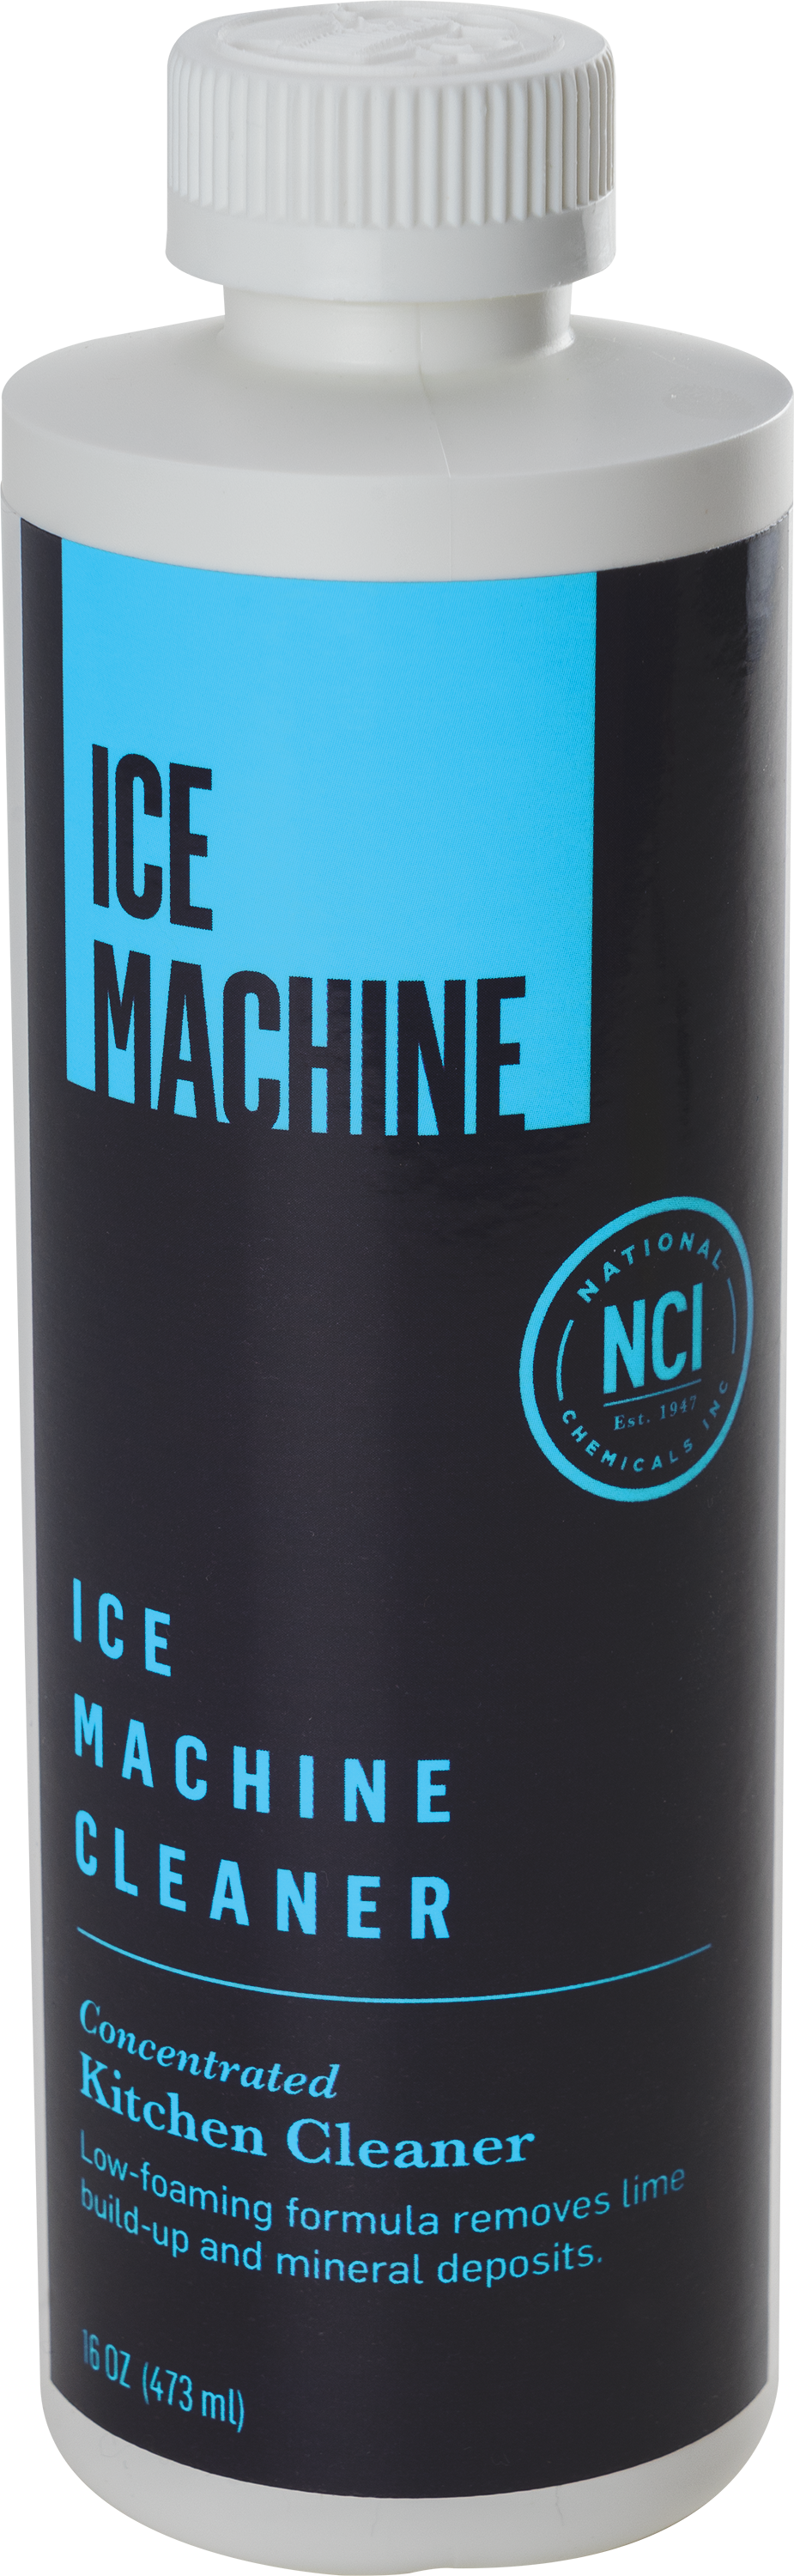 https://www.nationalchemicals.com/wp-content/uploads/2019/07/050319-NC-Ice-Machine-1.png